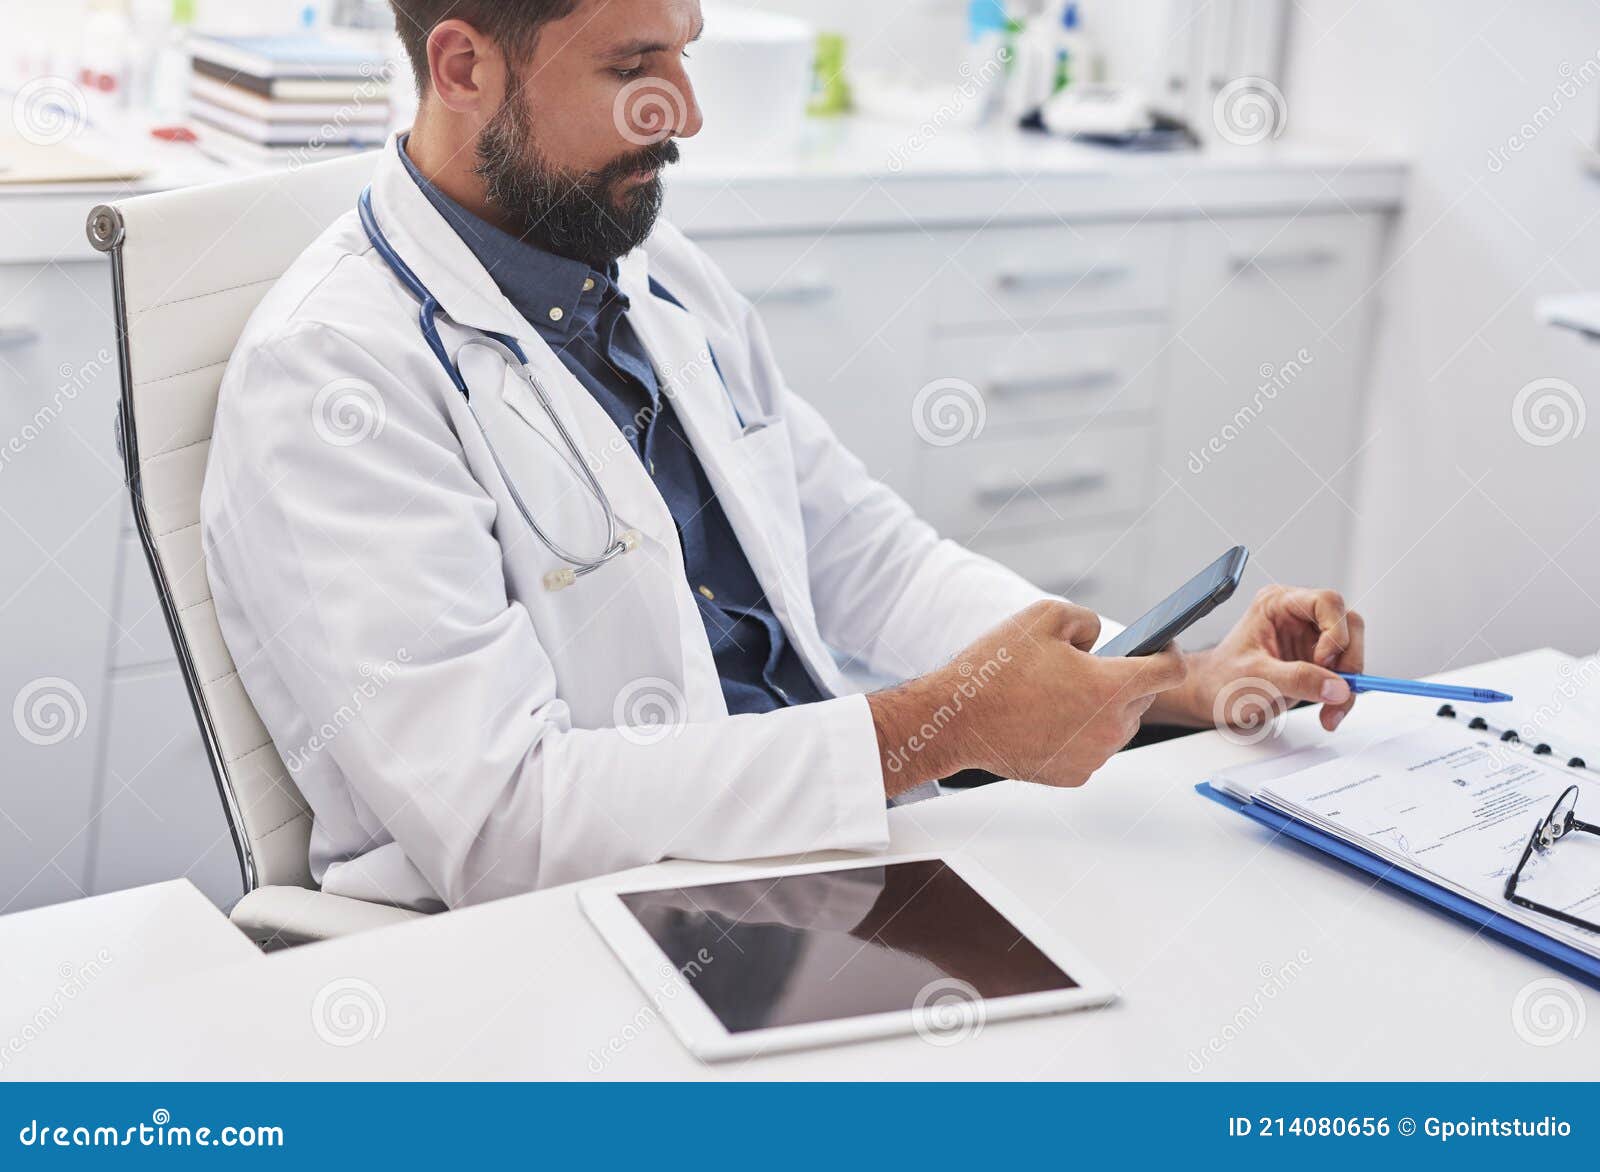 male doctor using mobile phone in his doctorÃ¢â¬â¢s office